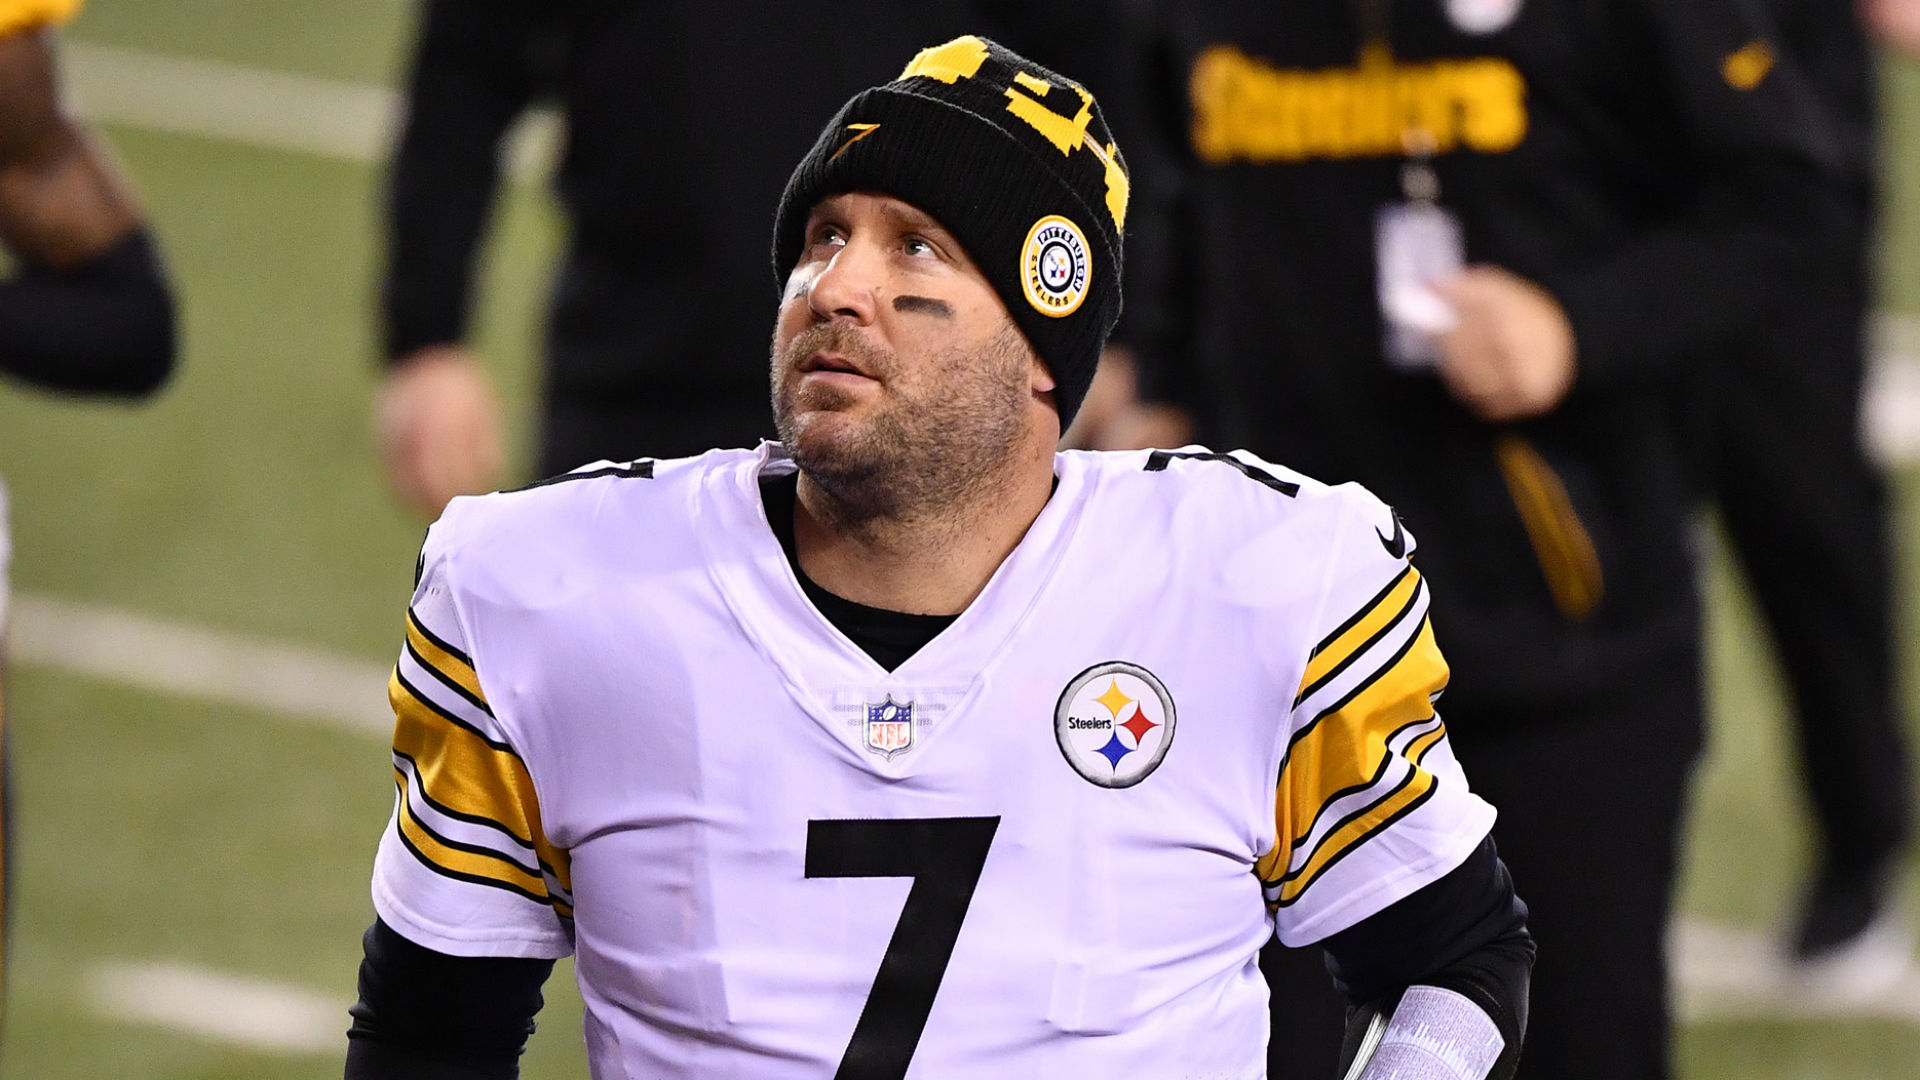 As question marks remain over two-time Super Bowl champion Ben Roethlisberger in Pittsburgh, Ryan Tollner provided an update on Tuesday.